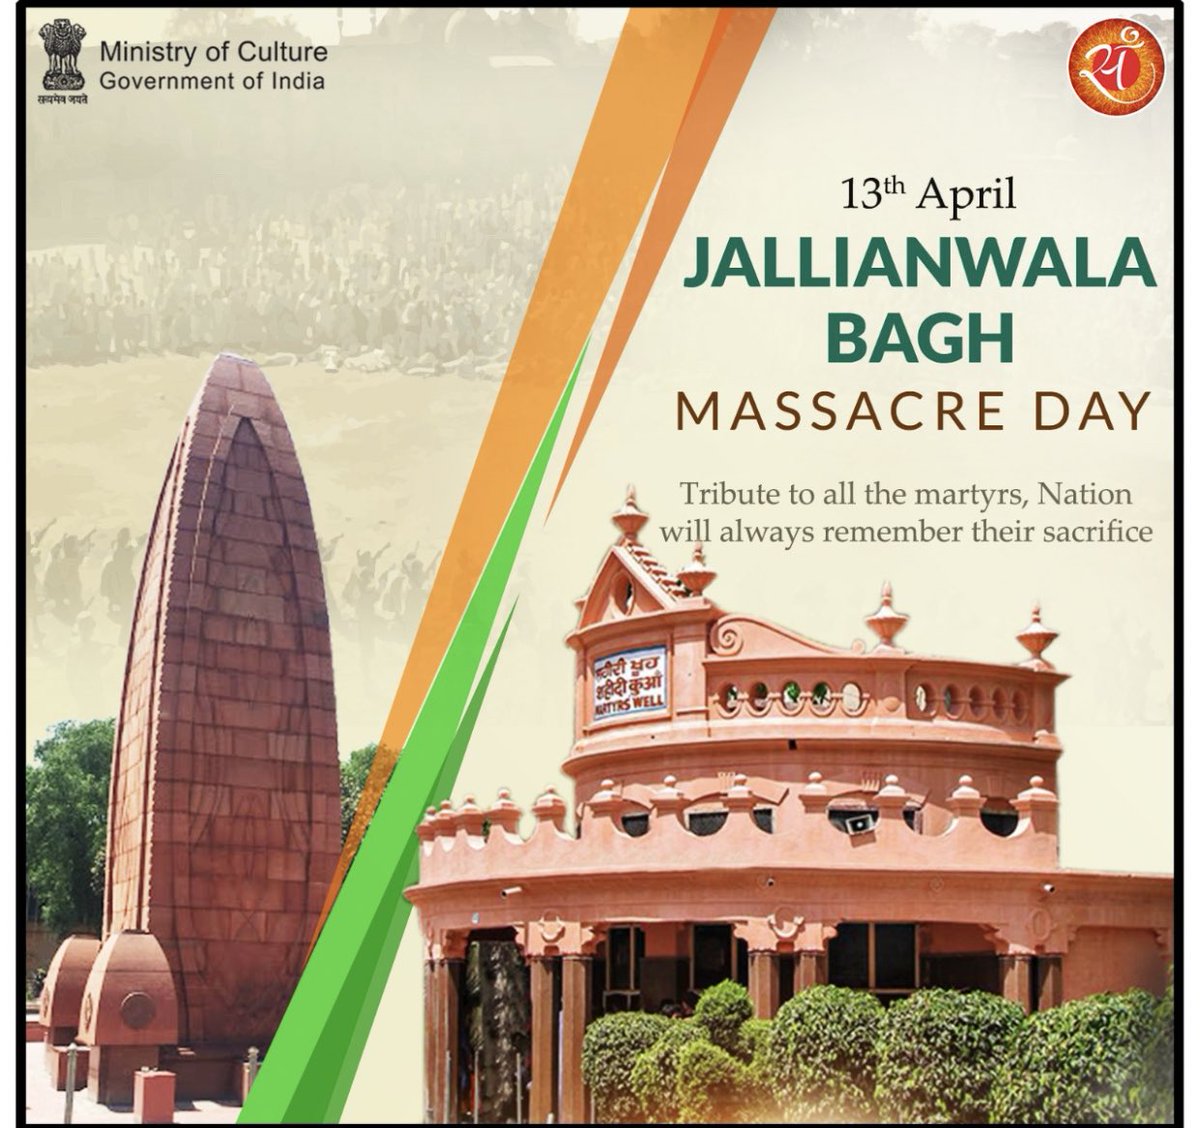 ⚫️#OTD in 1919, #GeneralDyer gave orders to open fire on a peacefully protesting crowd at #JallianwalaBagh.

⚫️ The infamous #JallianwalaBaghMassacre later became a symbol of Indian freedom struggle. 

⚫️ On its 102nd Anniversary, we pay tributes to the #जलियांवाला_बाग martyrs.